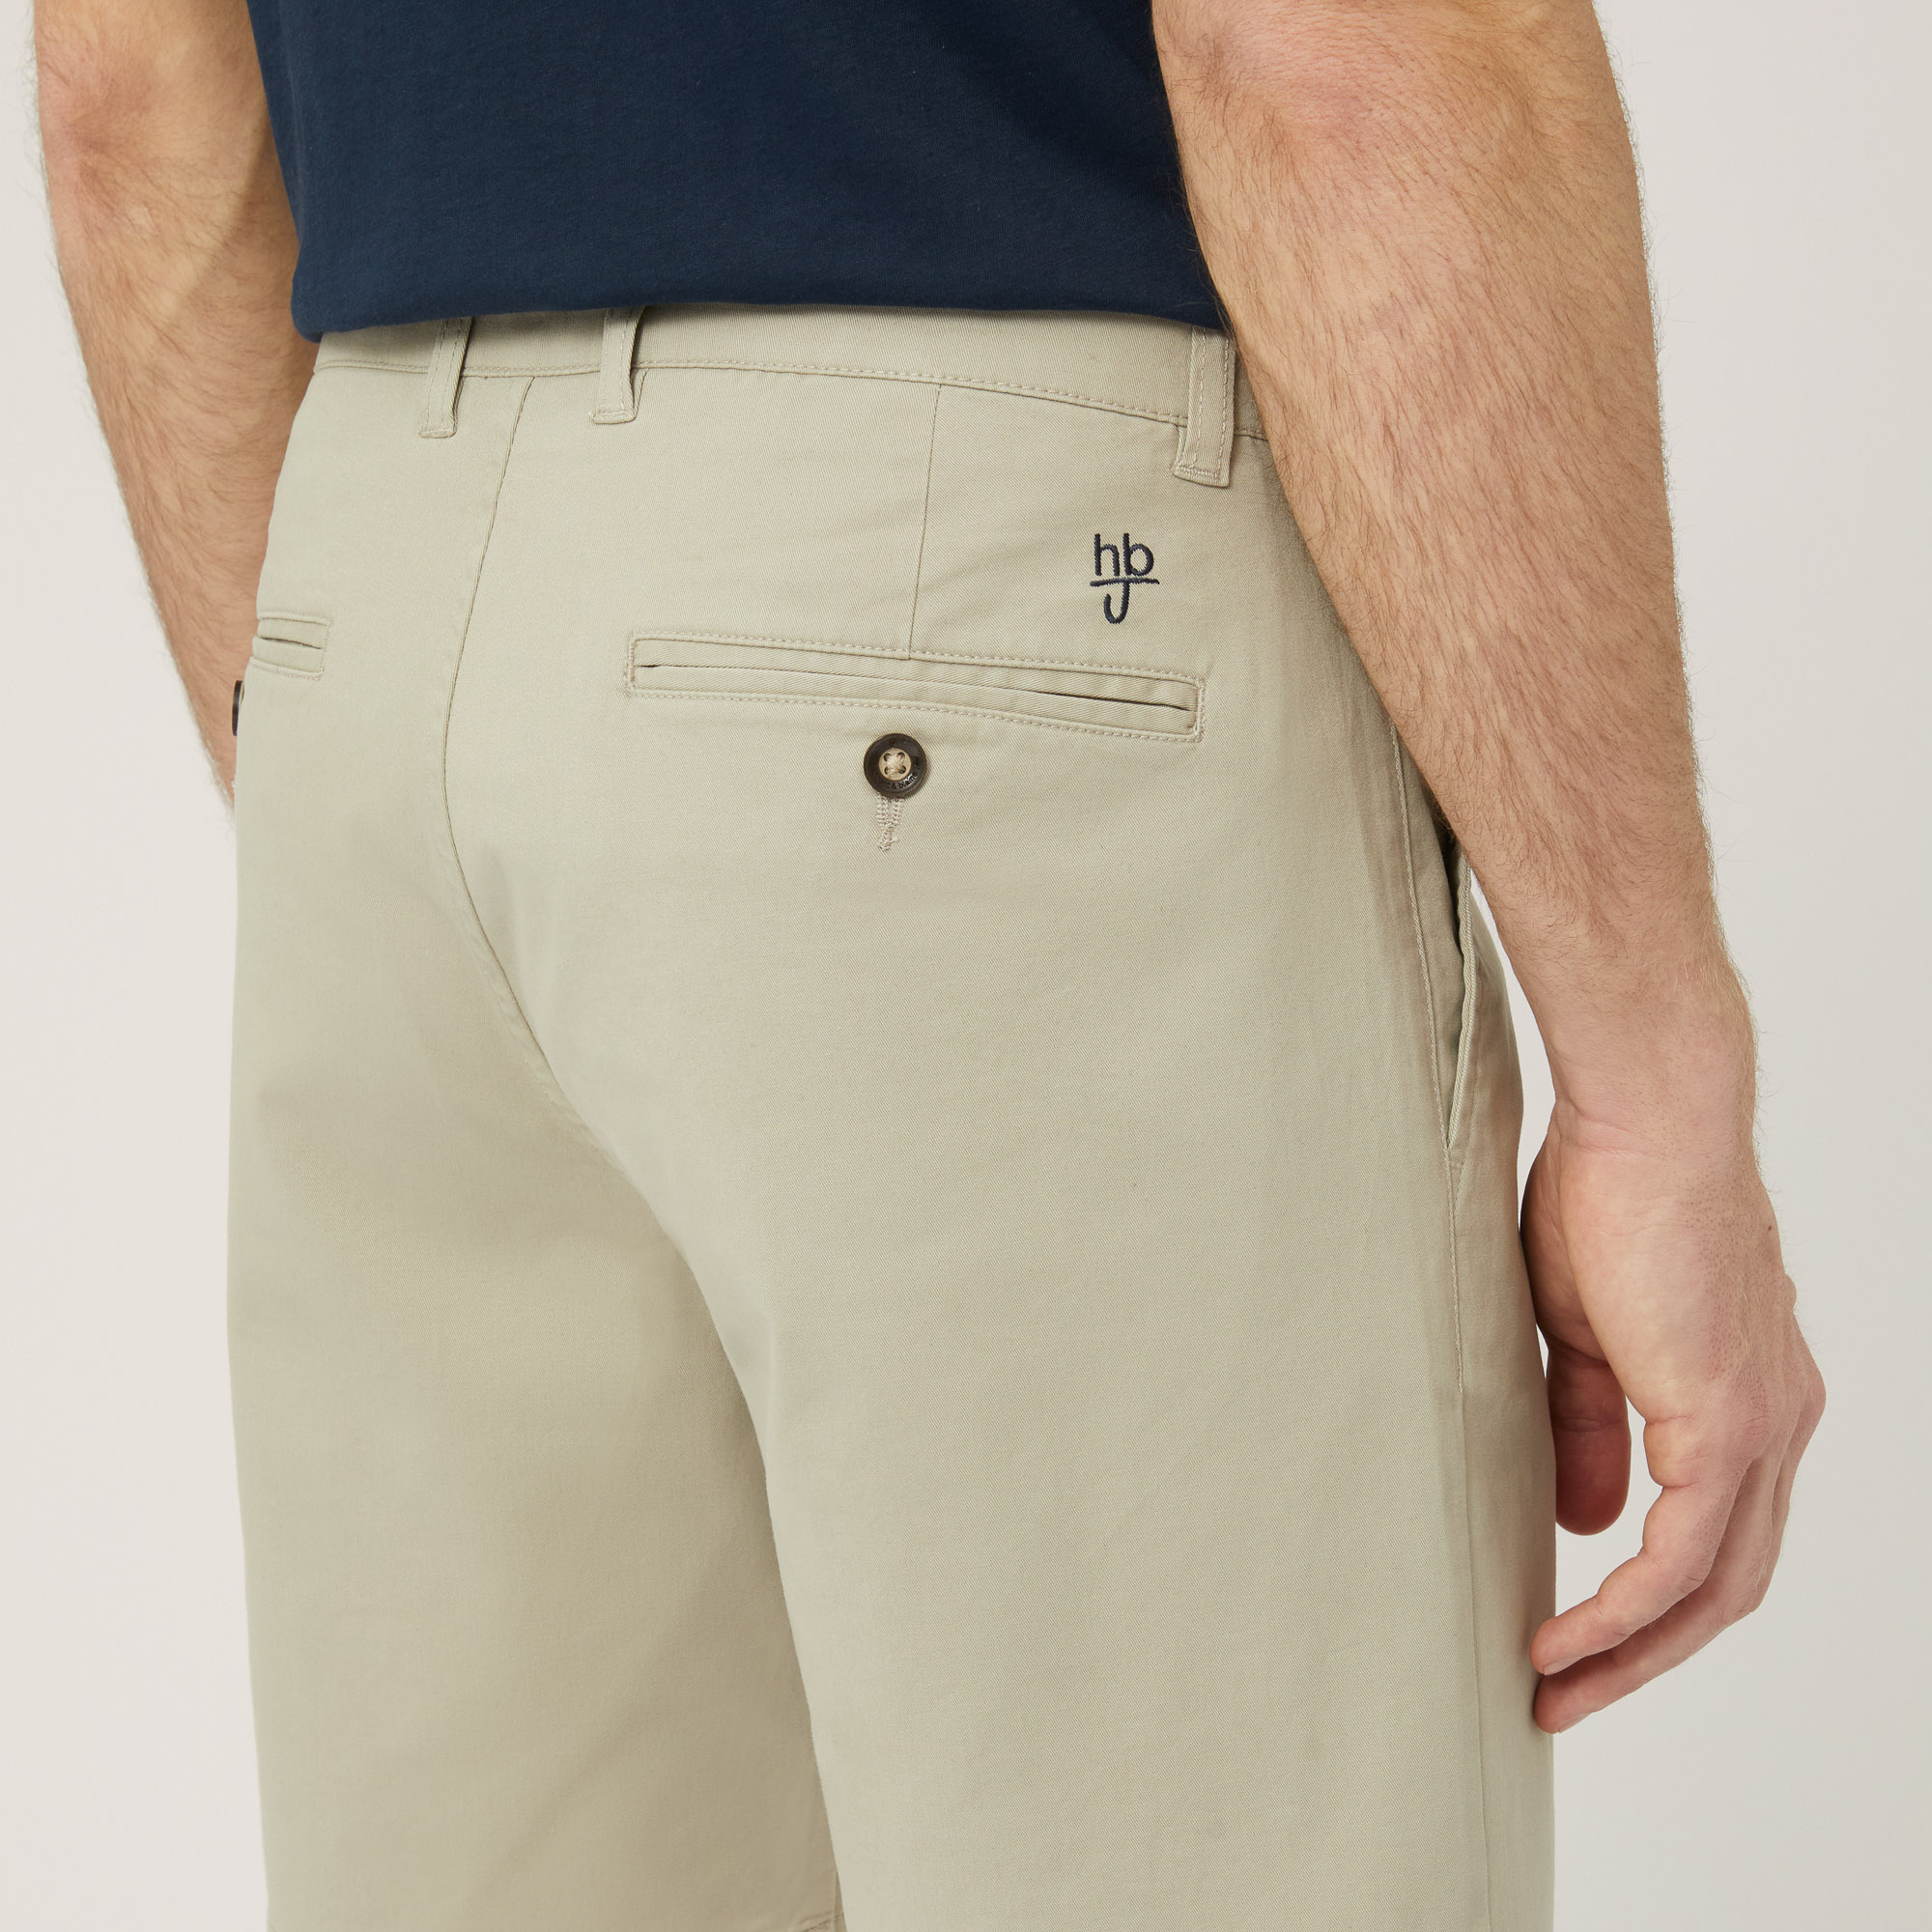 Bermuda Chino In Twill, Beige, large image number 2